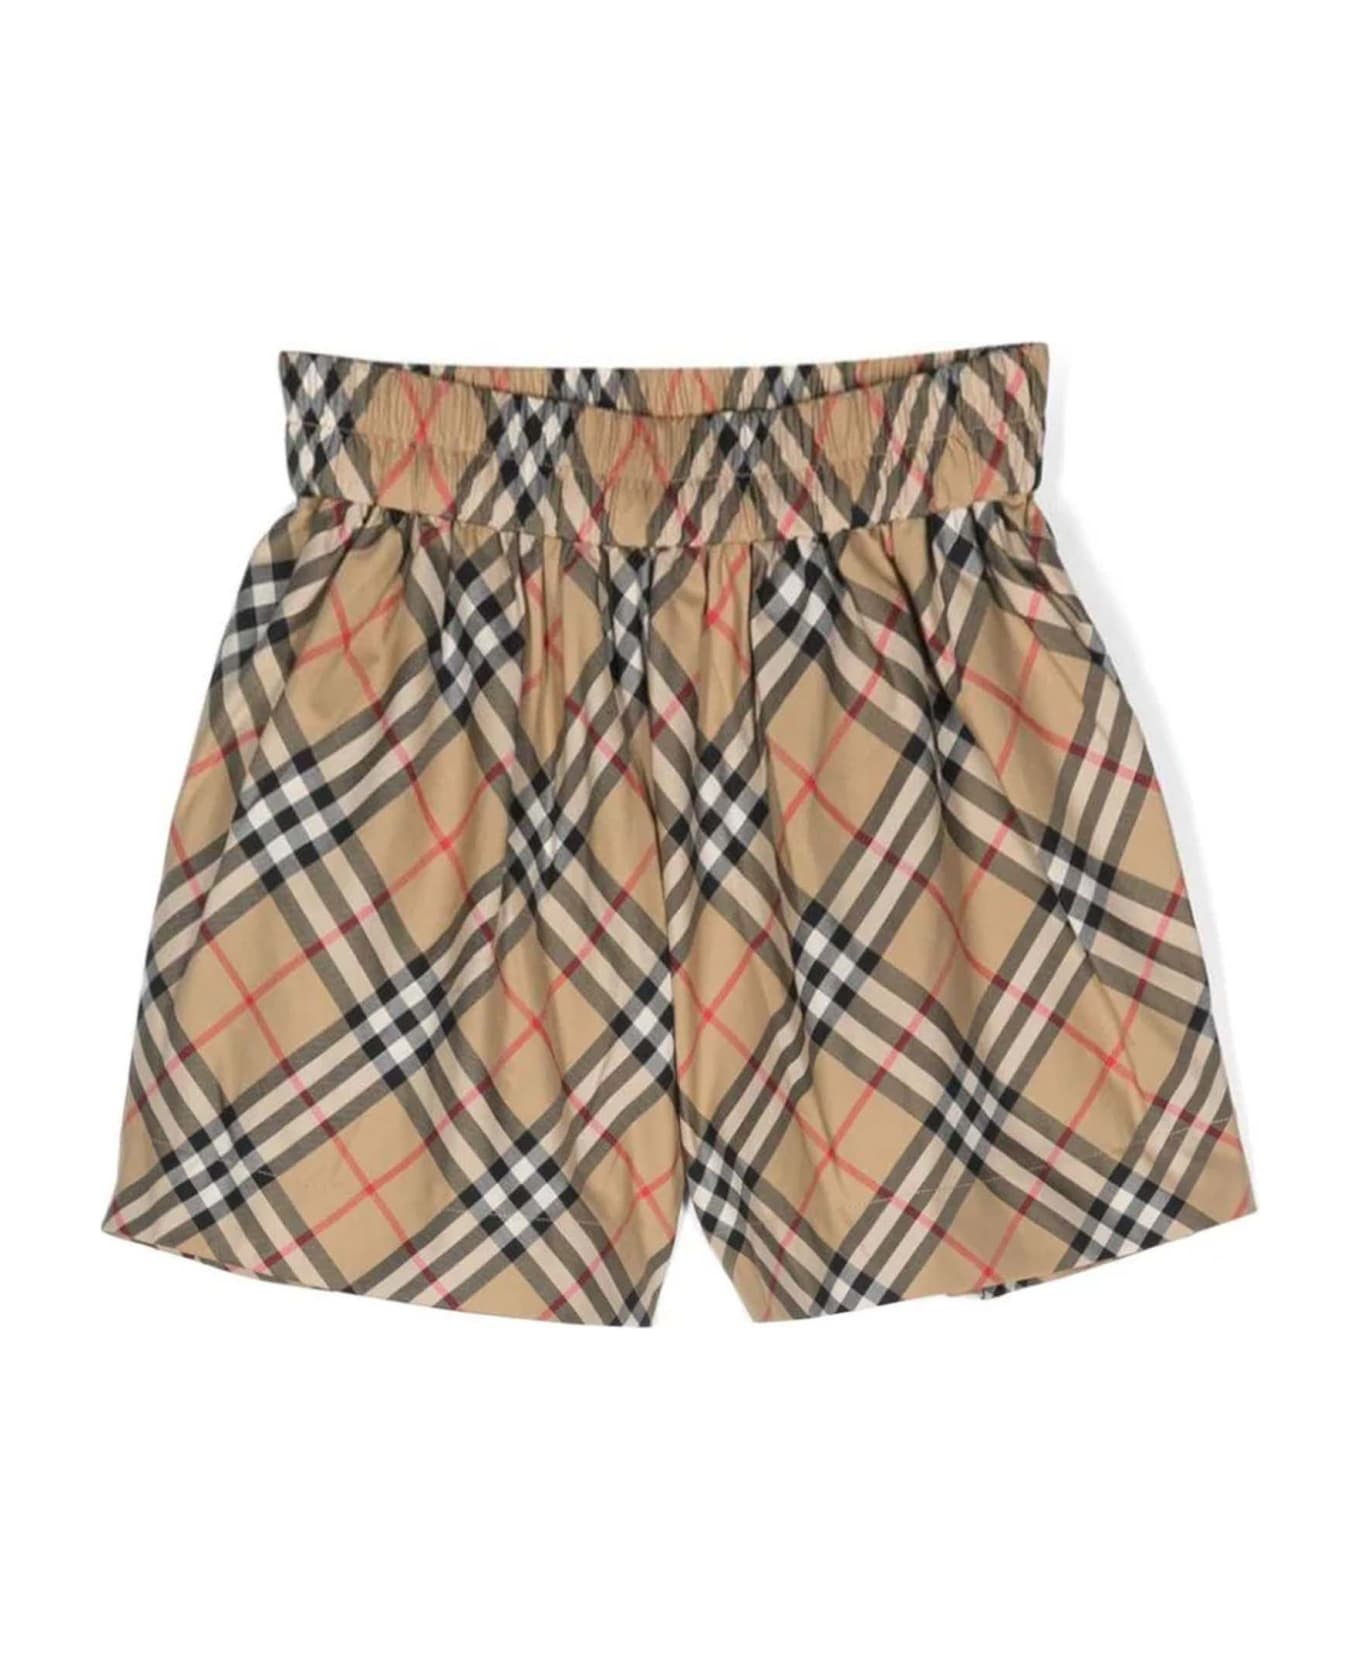 Burberry Vintage Check-pattern Cotton Shorts - Archive beige ip chk ボトムス